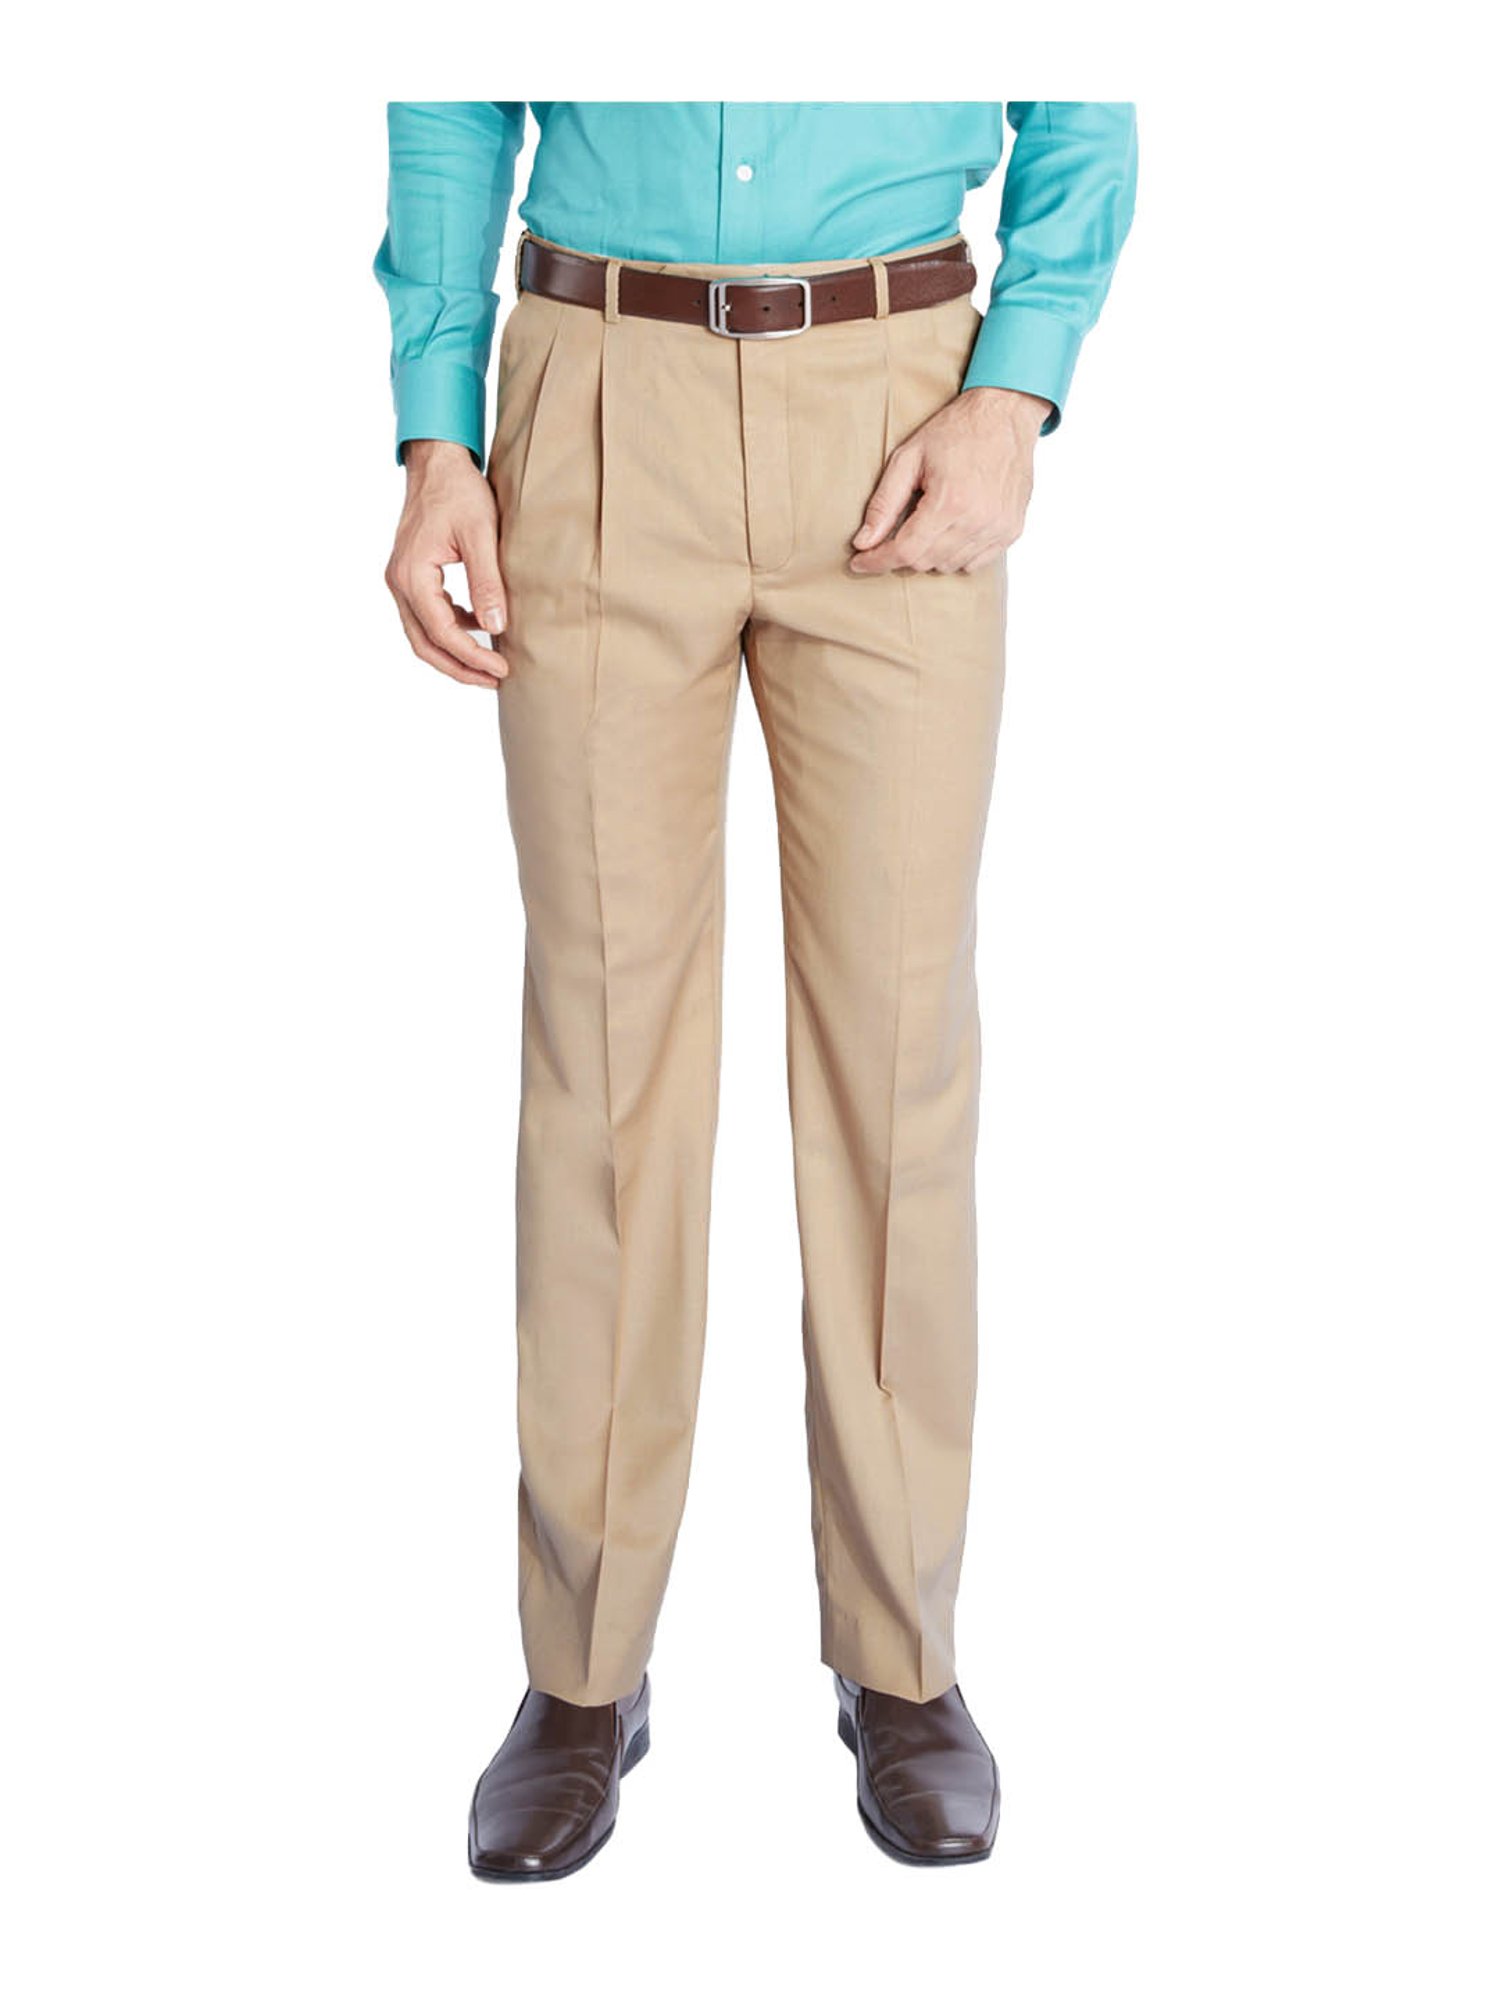 Multicolor Blue Band Mens Cotton Trousers Casual Wear